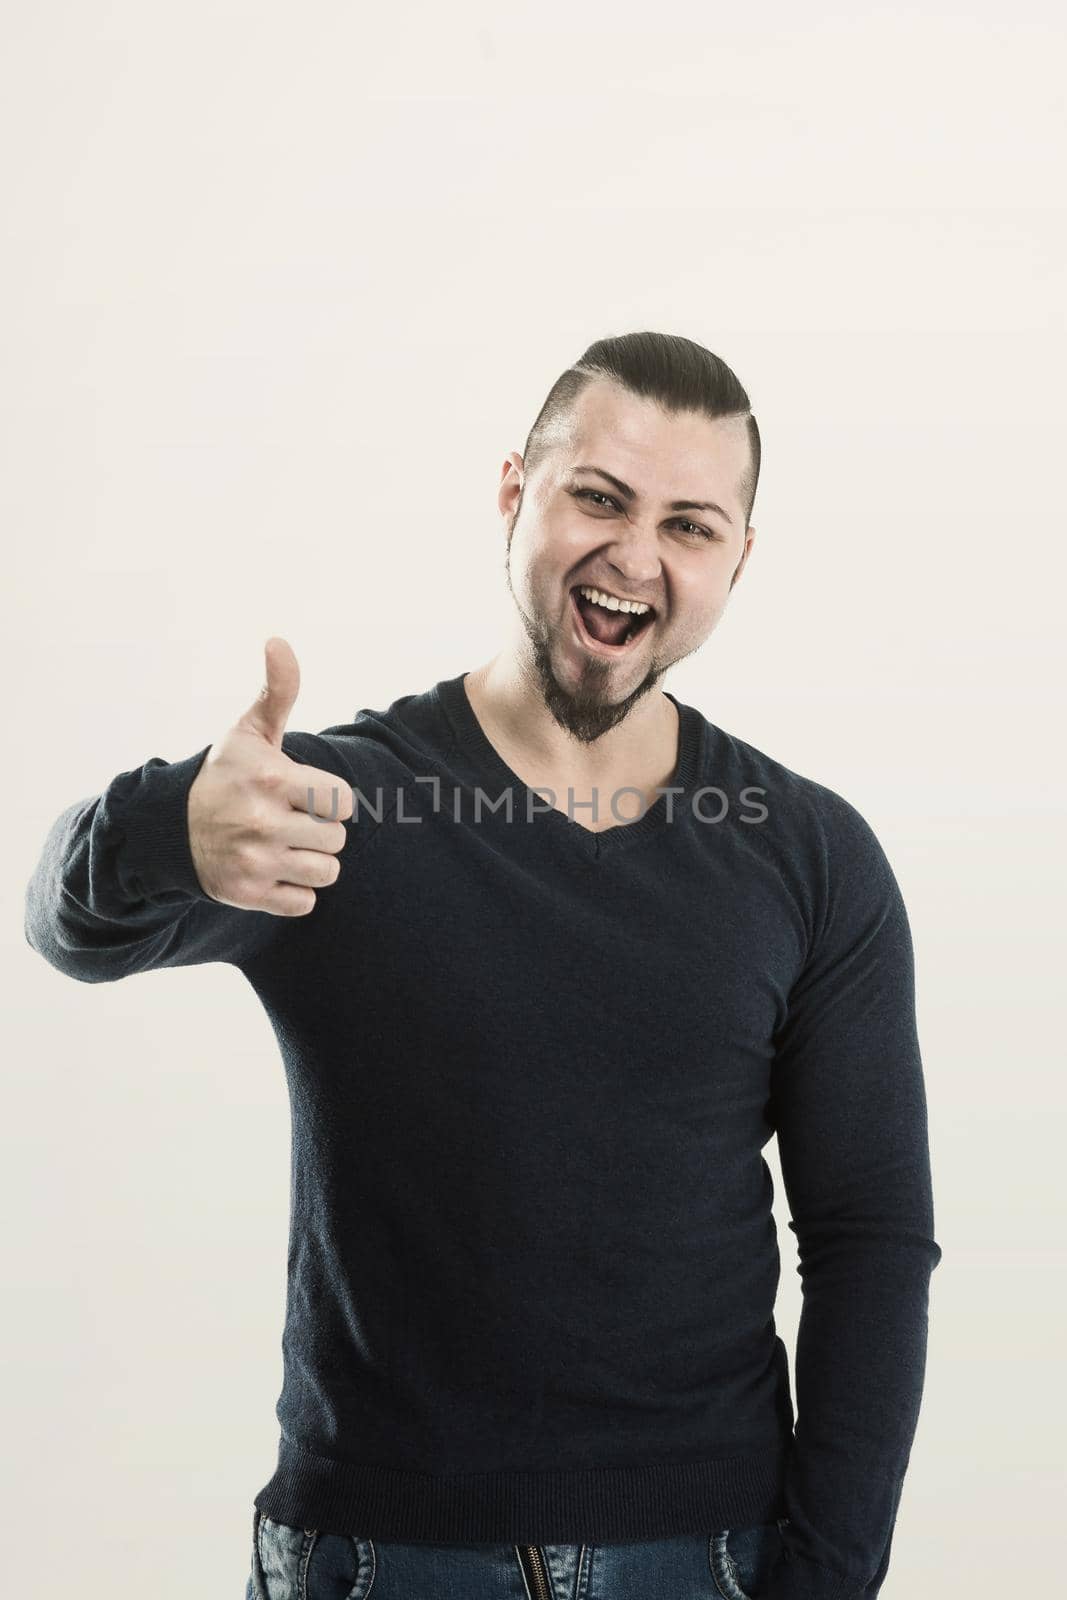 athletic guy bodybuilder in jeans and t-shirt showing gesture thumb up. the photo has a empty space for your text